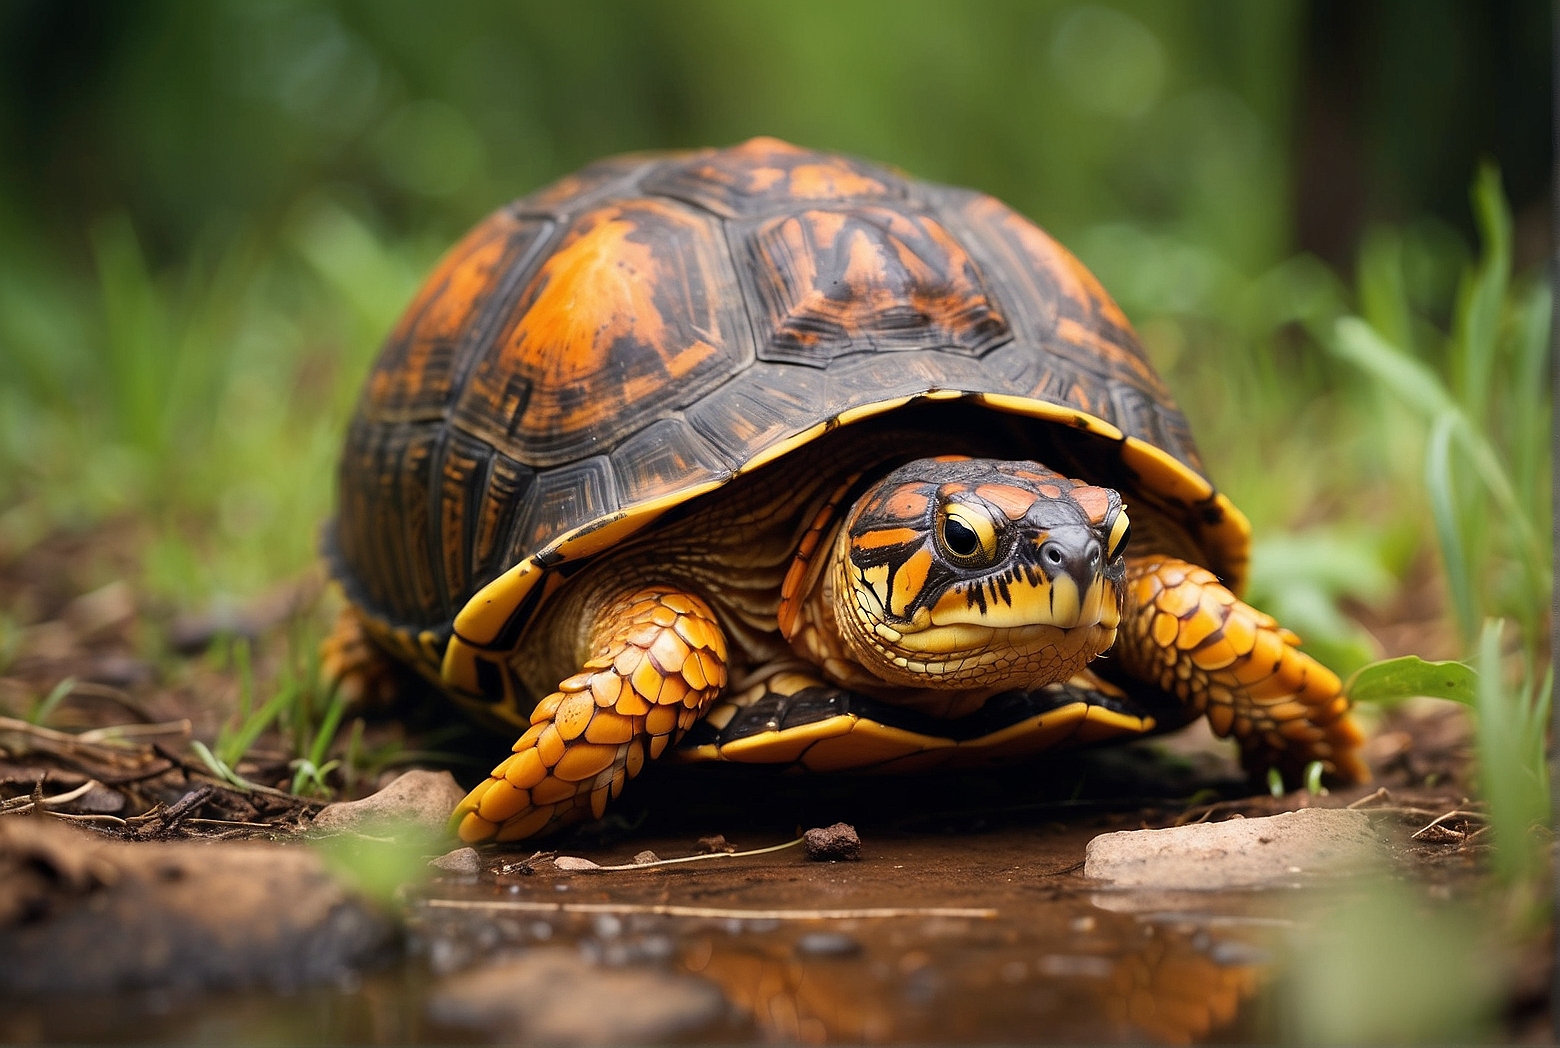 Is the Eastern Box Turtle Endangered?